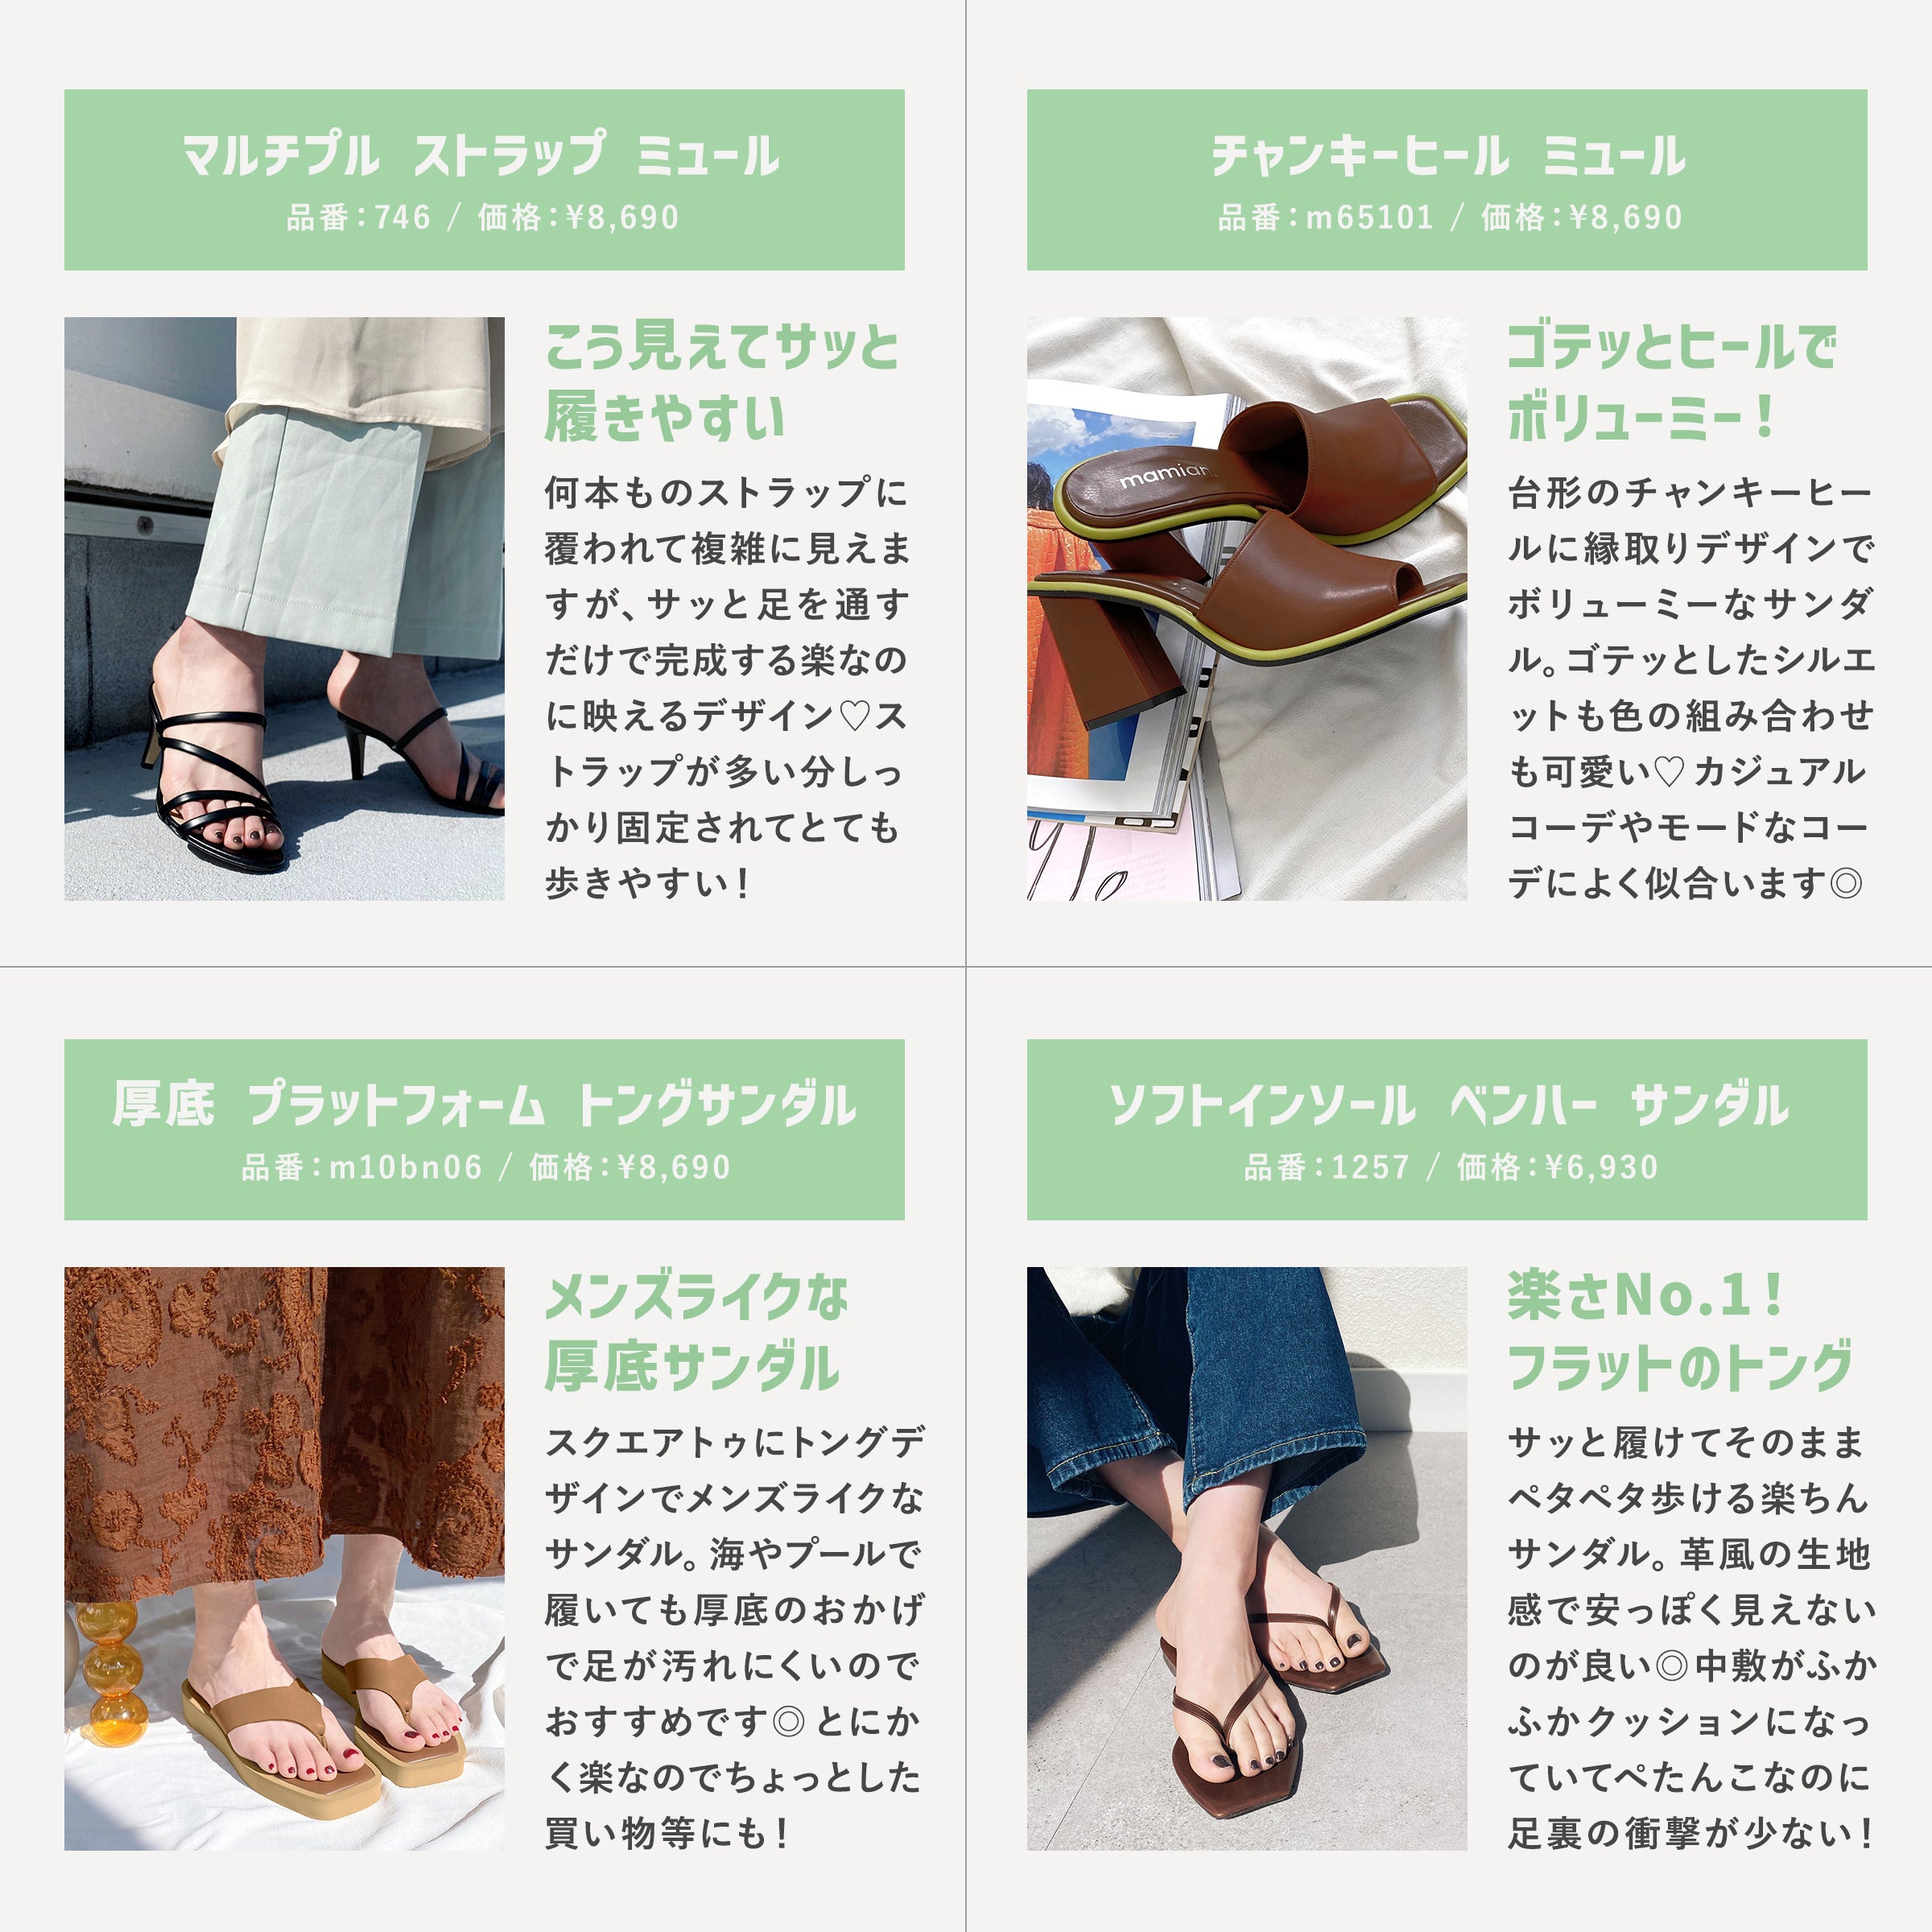 Special feature on sandals that can be put on quickly without using hands